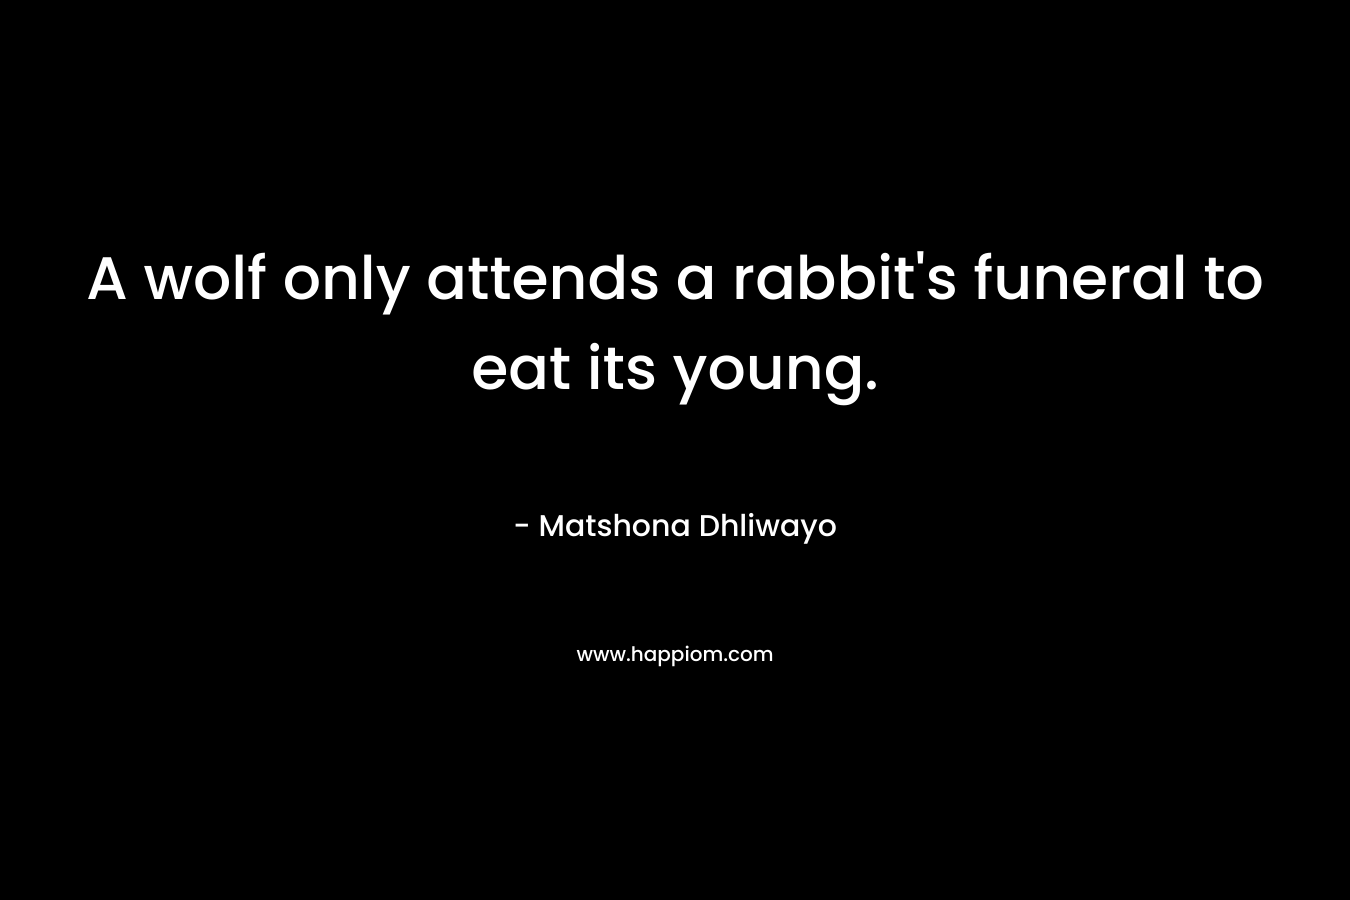 A wolf only attends a rabbit's funeral to eat its young.